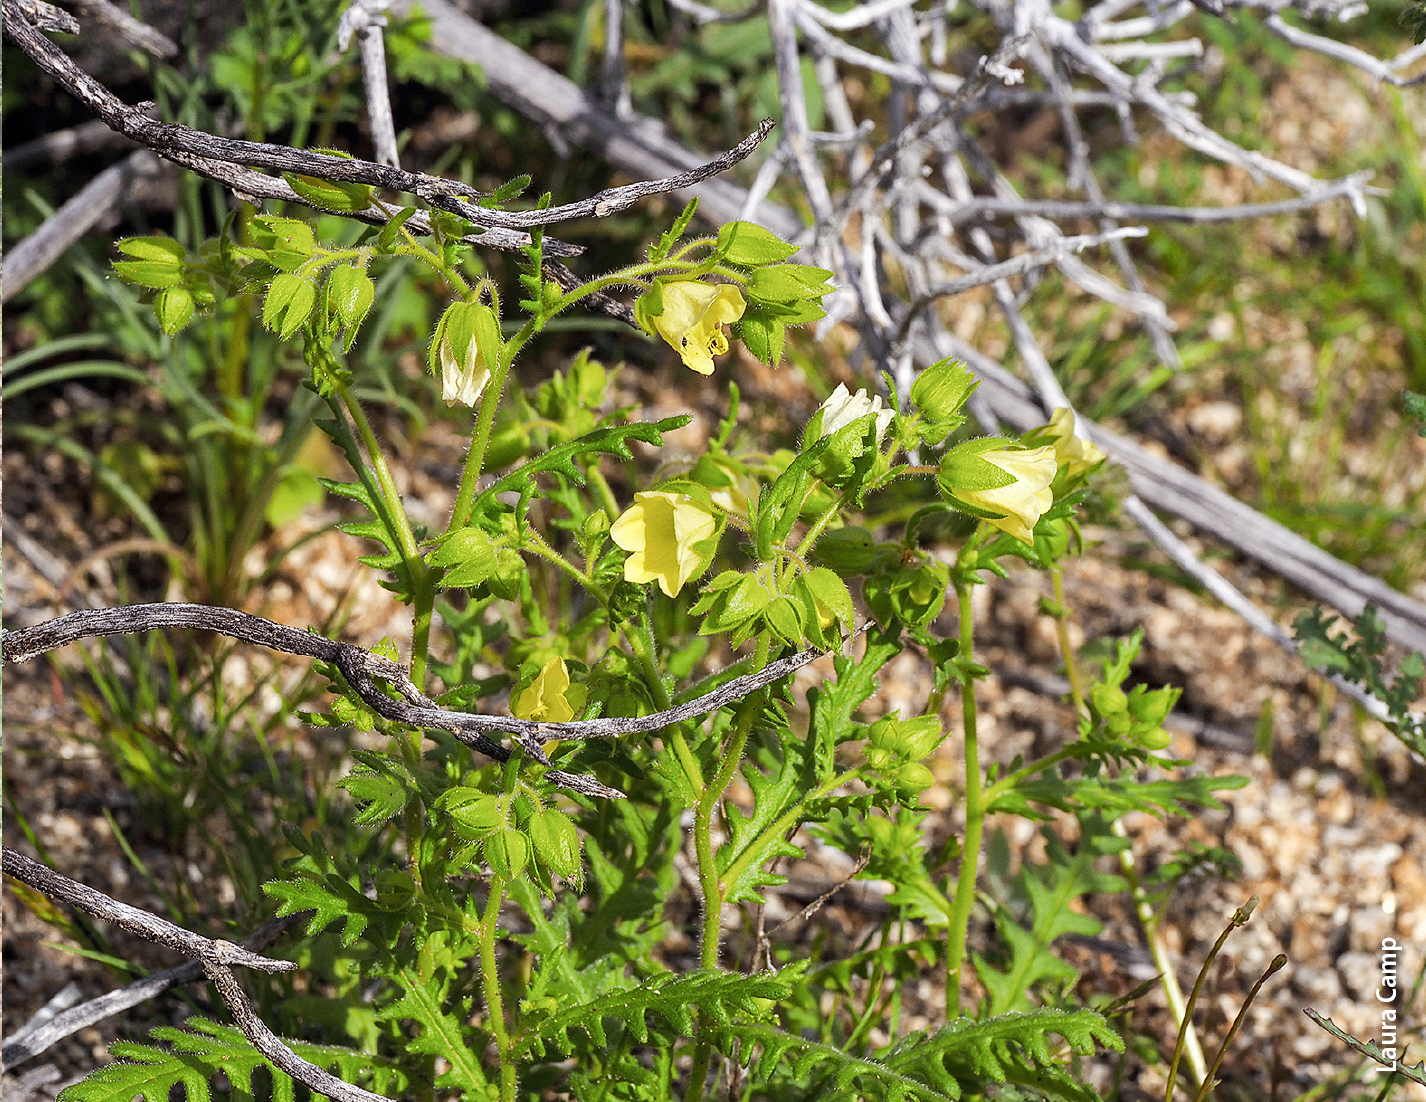 Whisperingbells (Emmenanthe penduliflora) may cycle the nitrogen in wildfire ash faster than nitrogen-fixing herbaceous plants.